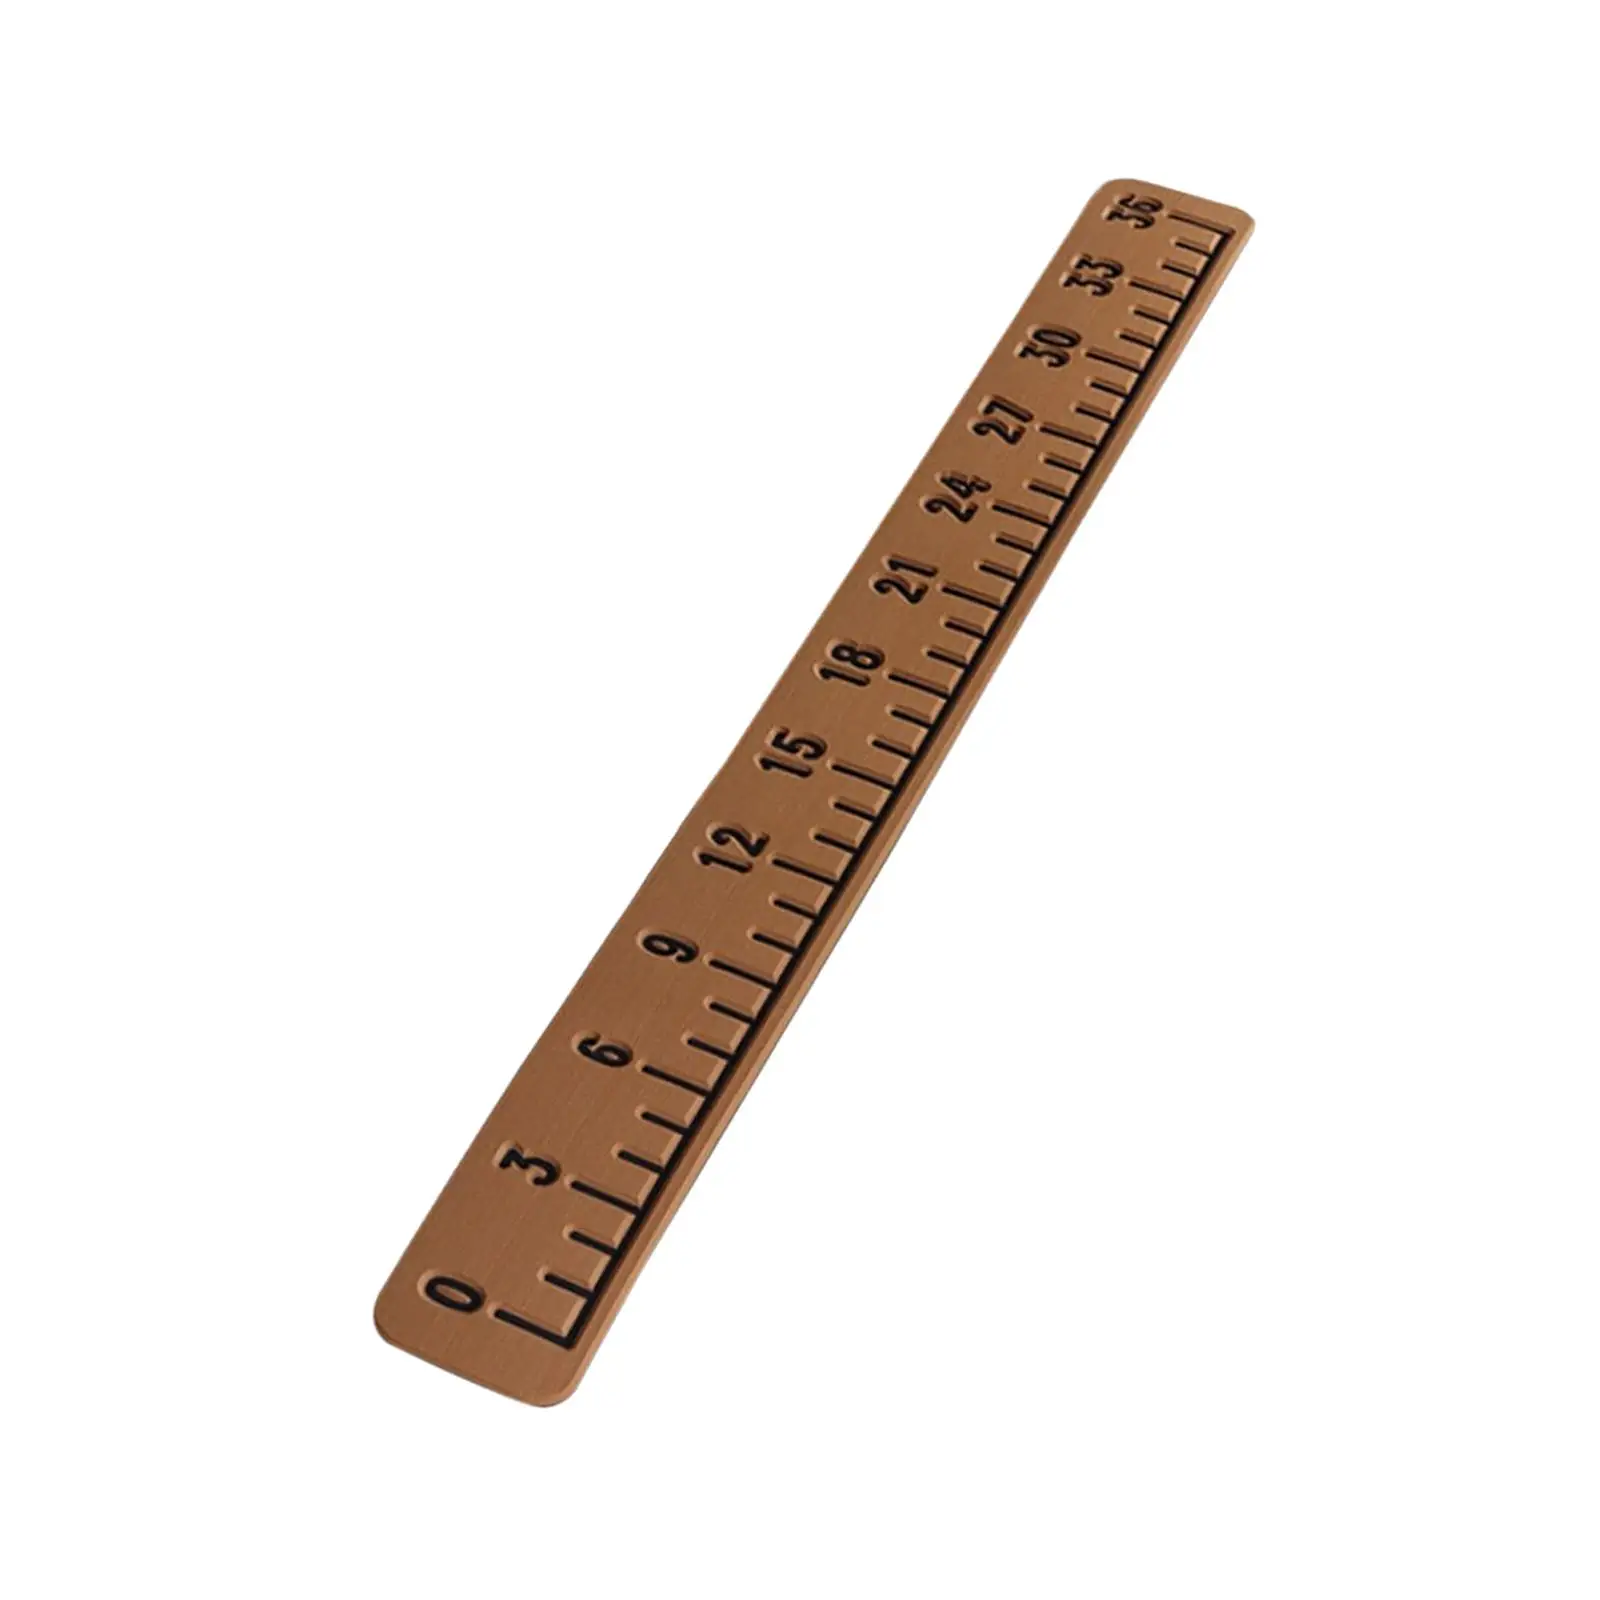 Fish Ruler for Boat 6mm Thickness Etched Numbers Fishing Measuring Tape for Yachts